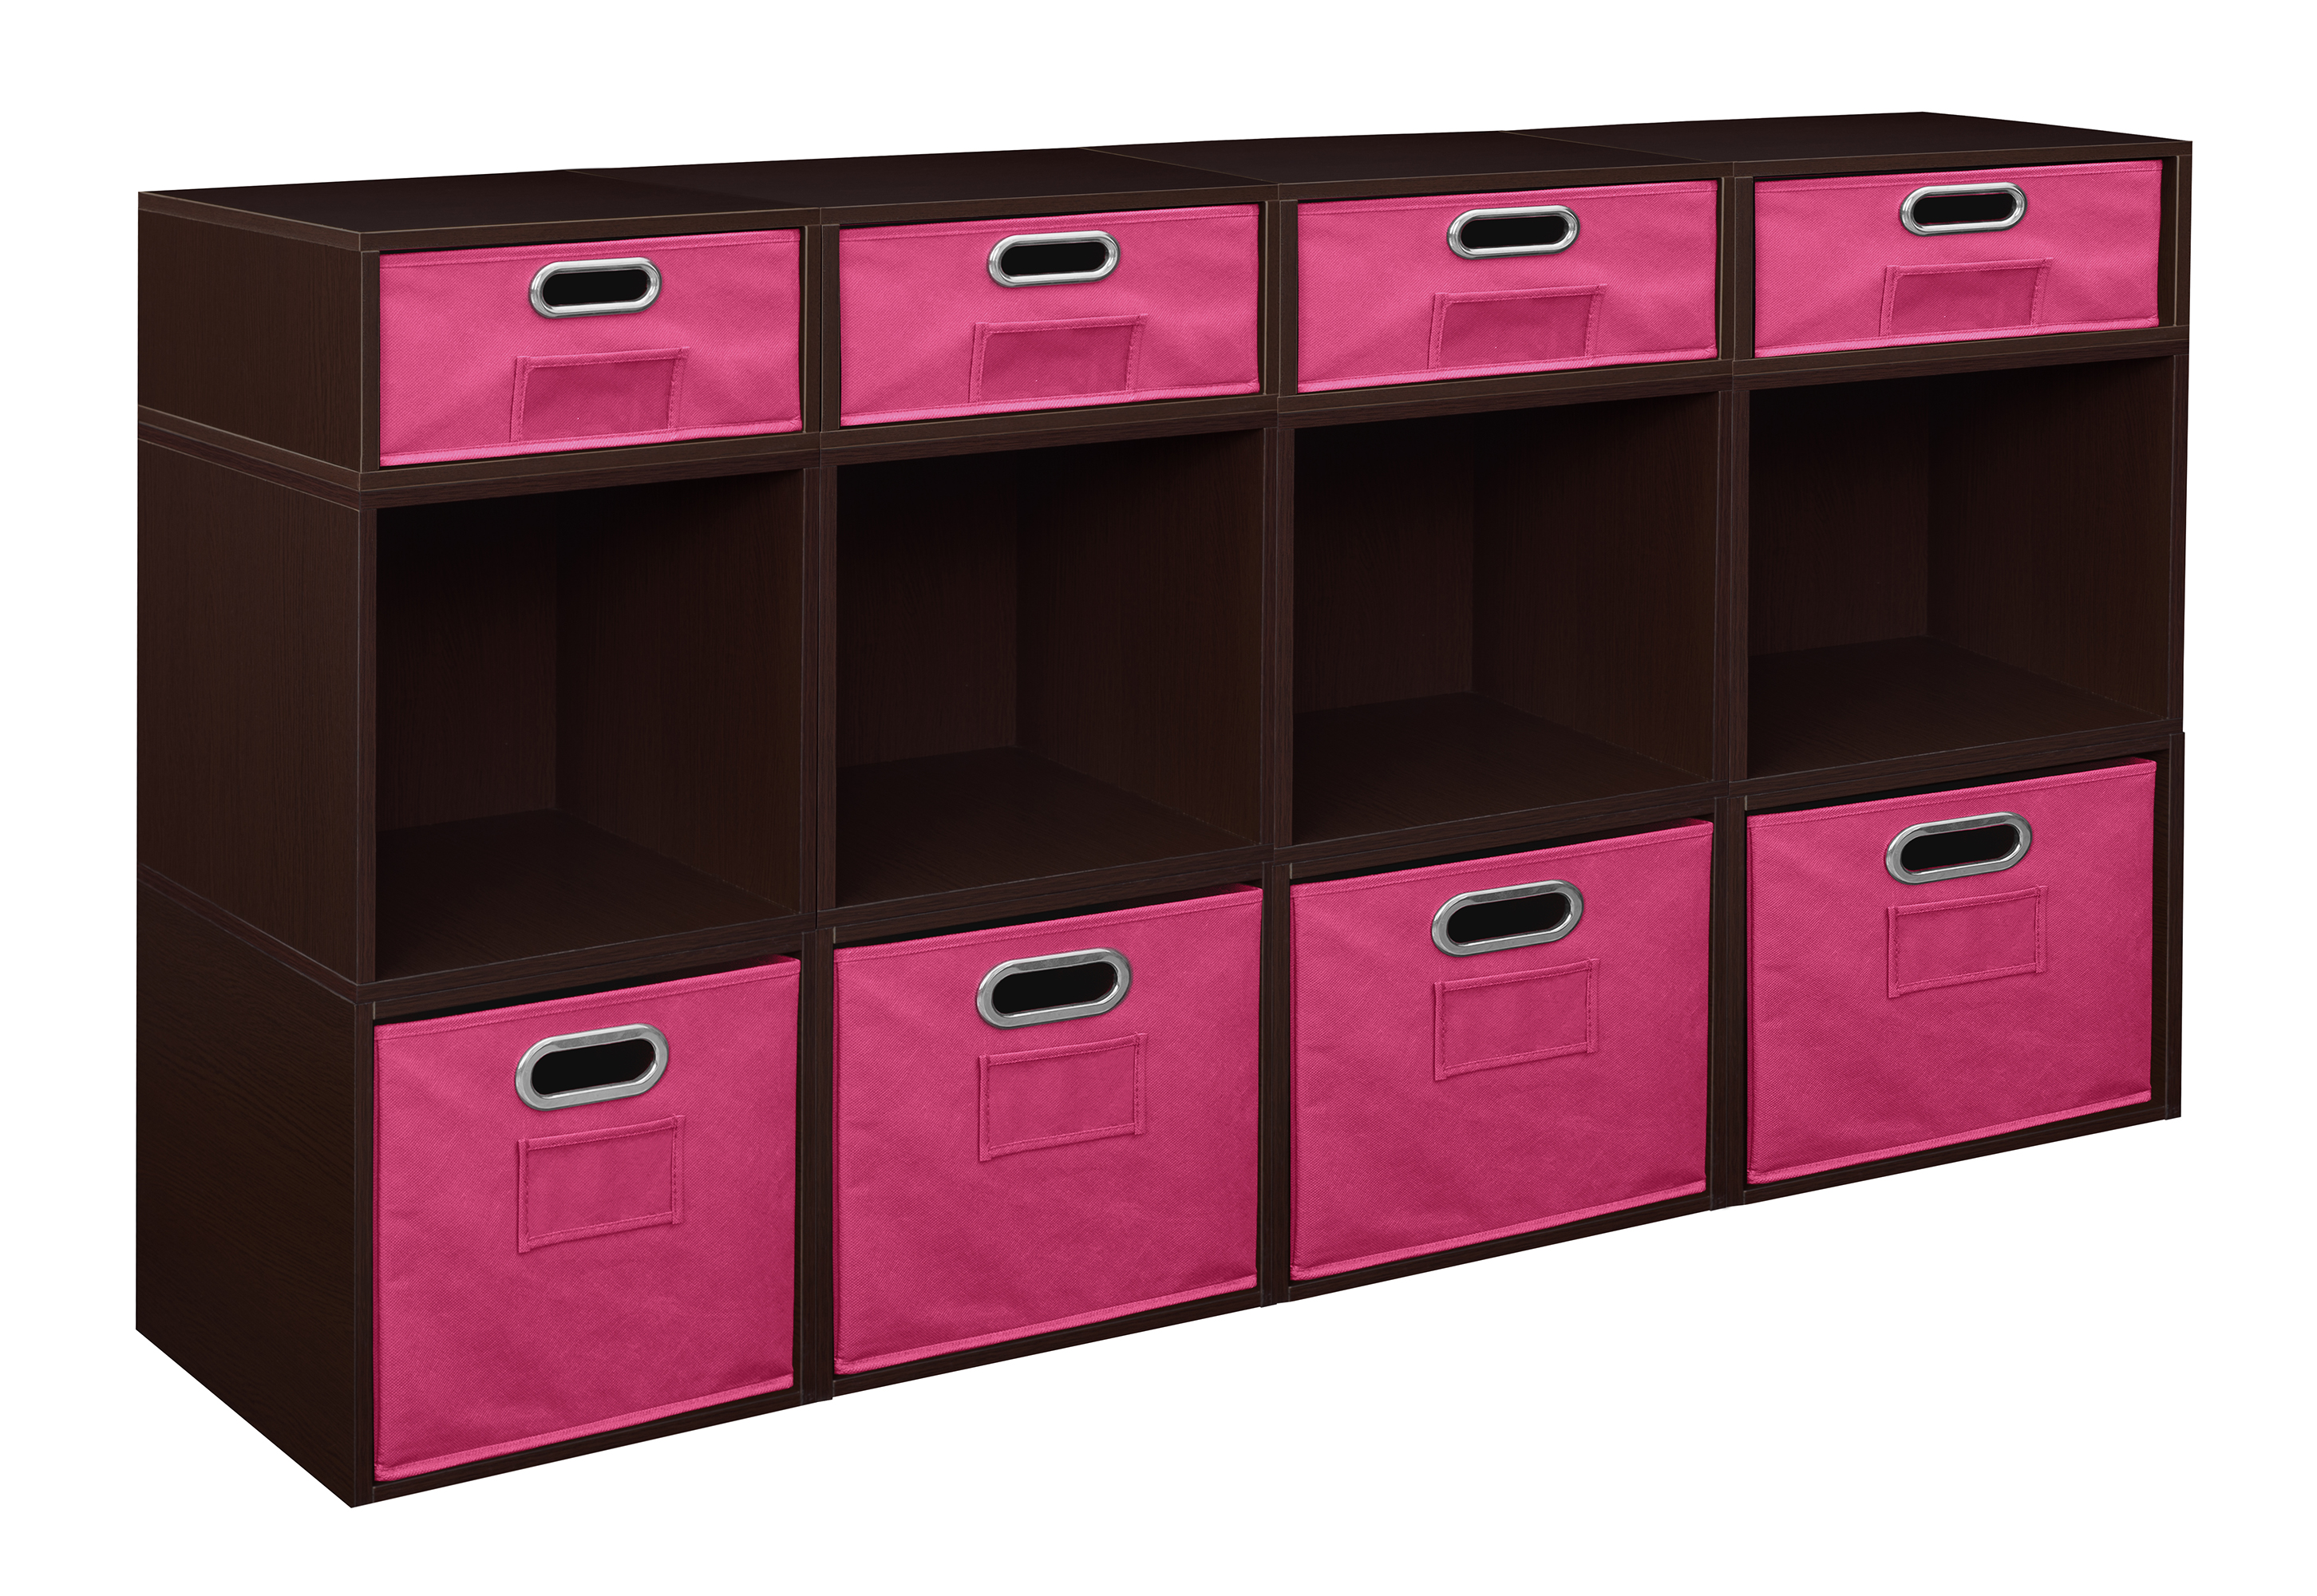 Niche Cubo Storage Set- 8 Full Cubes/4 Half Cubes with Foldable Storage Bins- Truffle/Pink - image 1 of 8